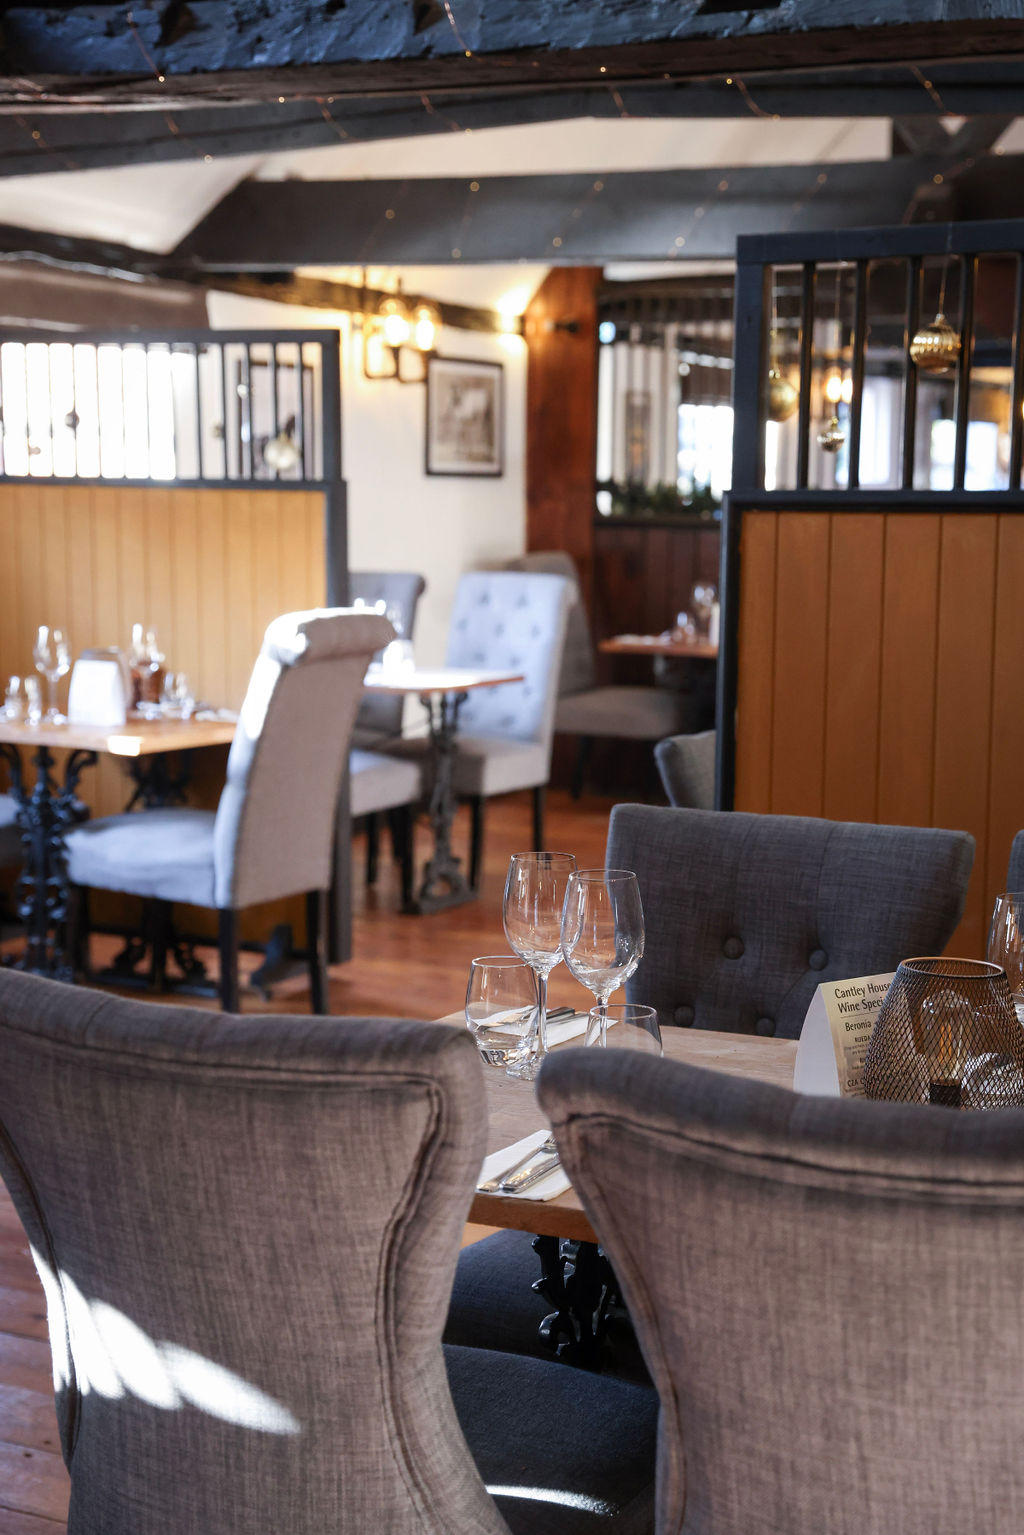 Stables Restaurant Dining Room The Stables Wokingham 01189 789912